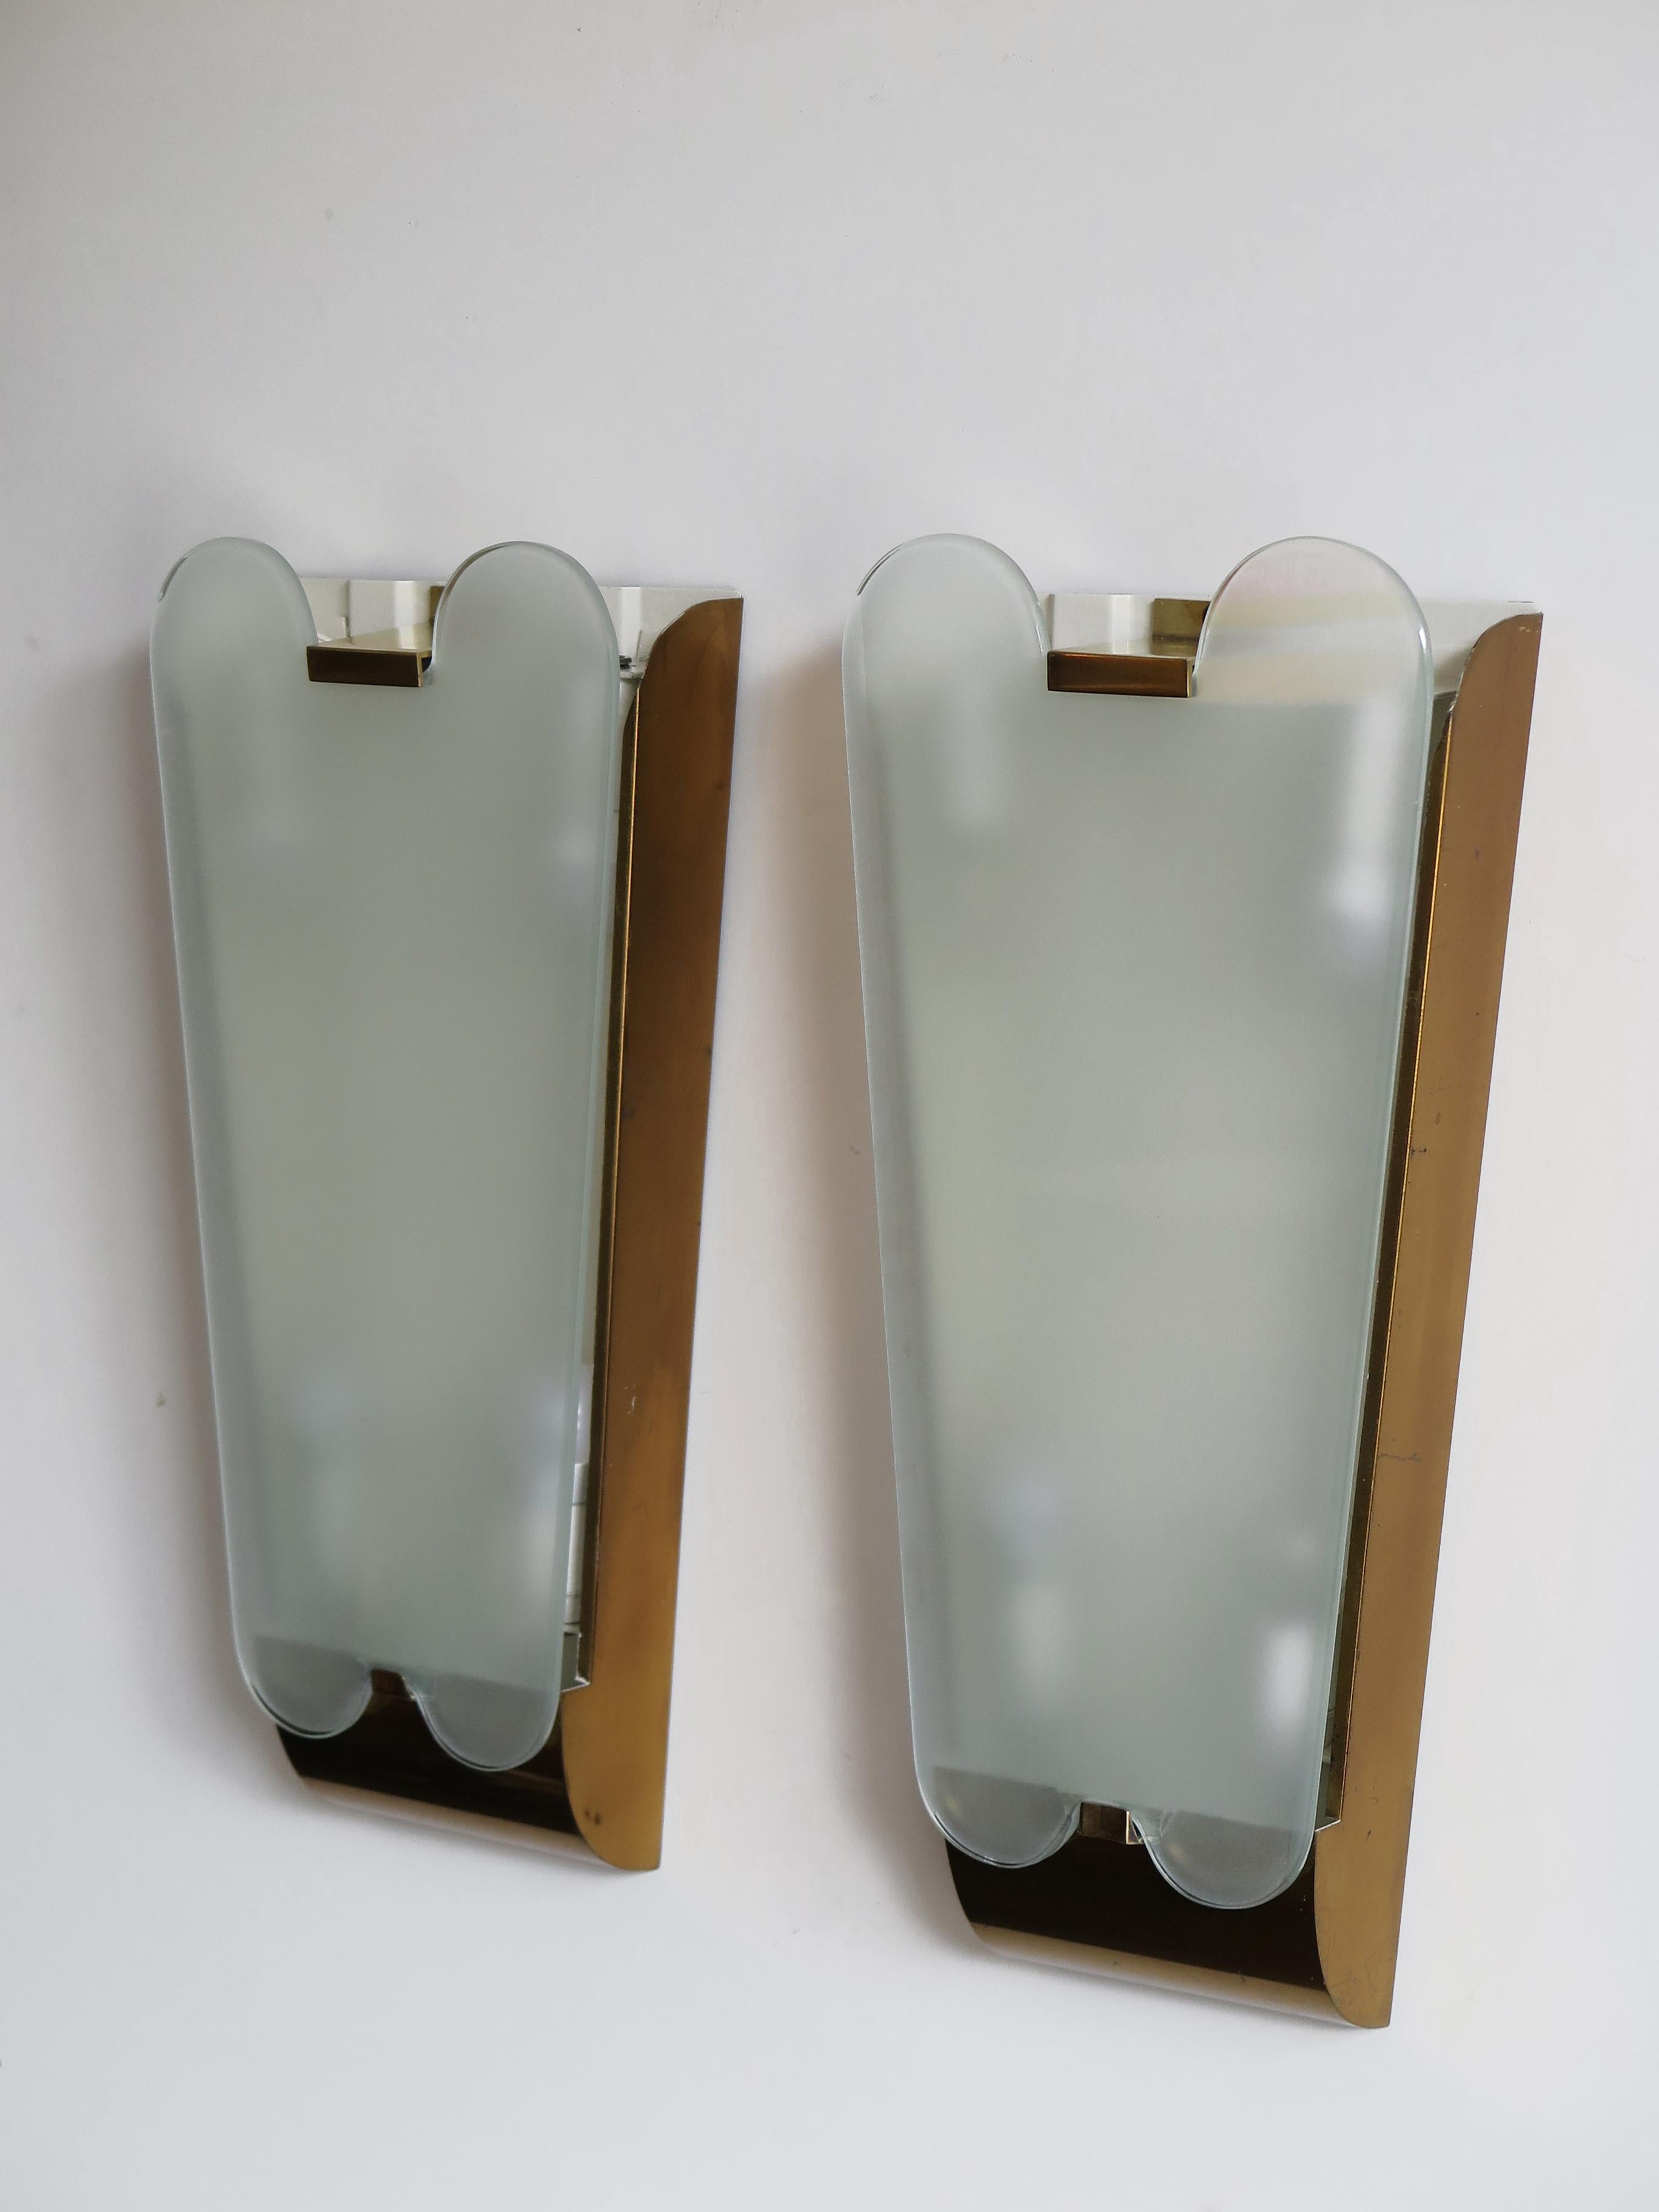 Italian Mid-Century Modern design Fontana Arte big sconces / wall lamps with brass frame and frosted glass diffusers, 1940s
Please note that the lamps are original of the period and this shows normal signs of age and use.